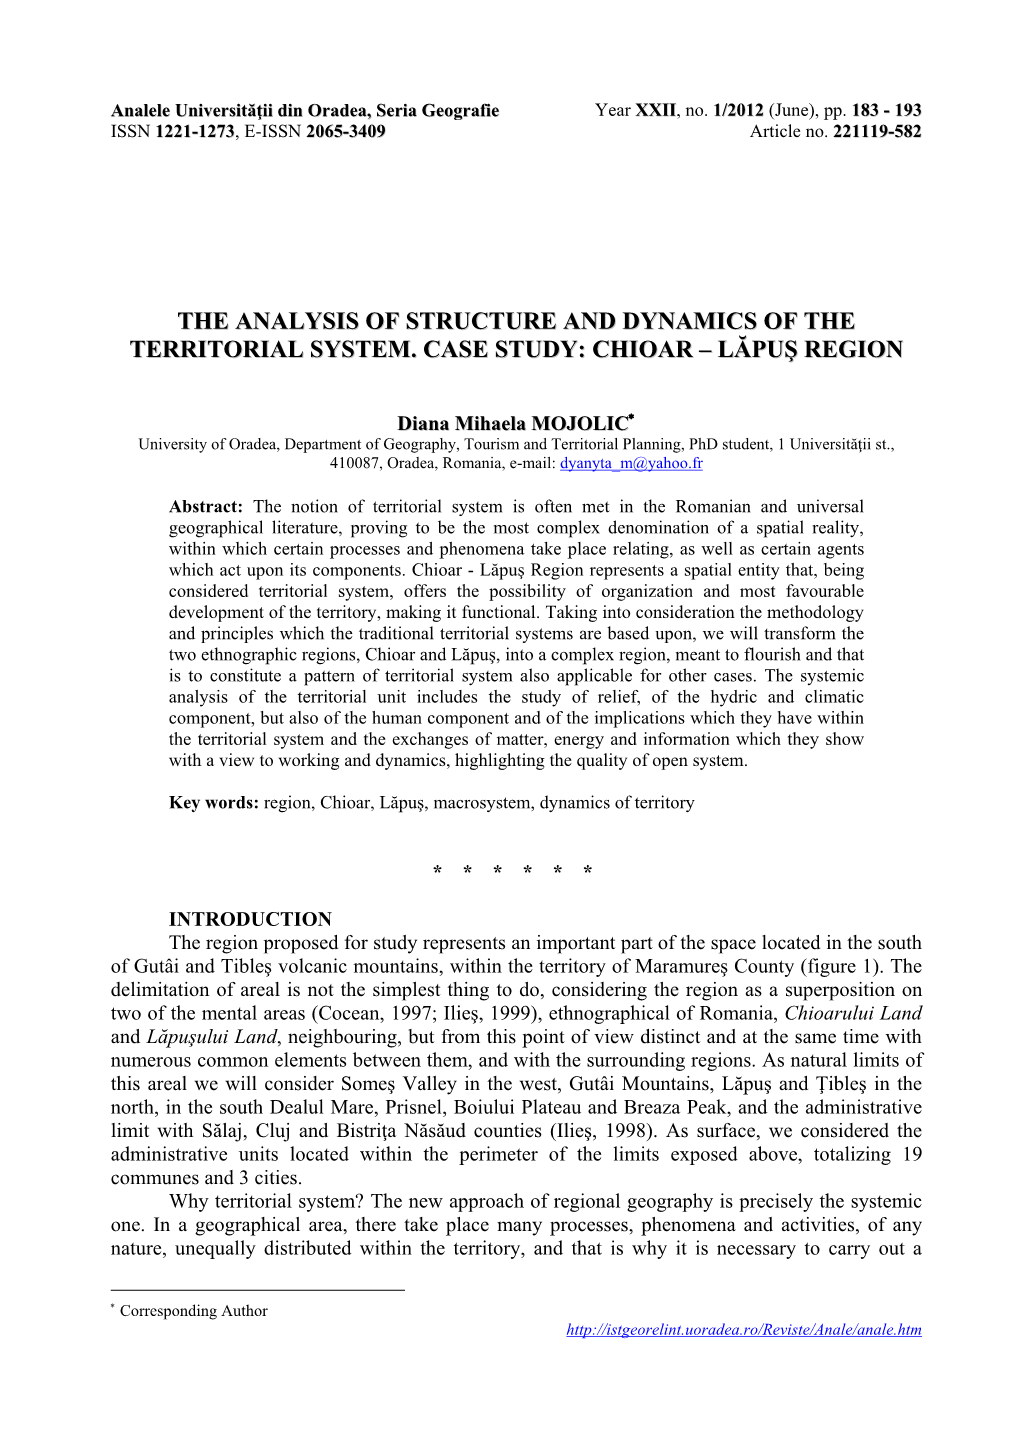 The Analysis of Structure and Dynamics of the Territorial System. Case Study: Chioar – Lăpuş Region